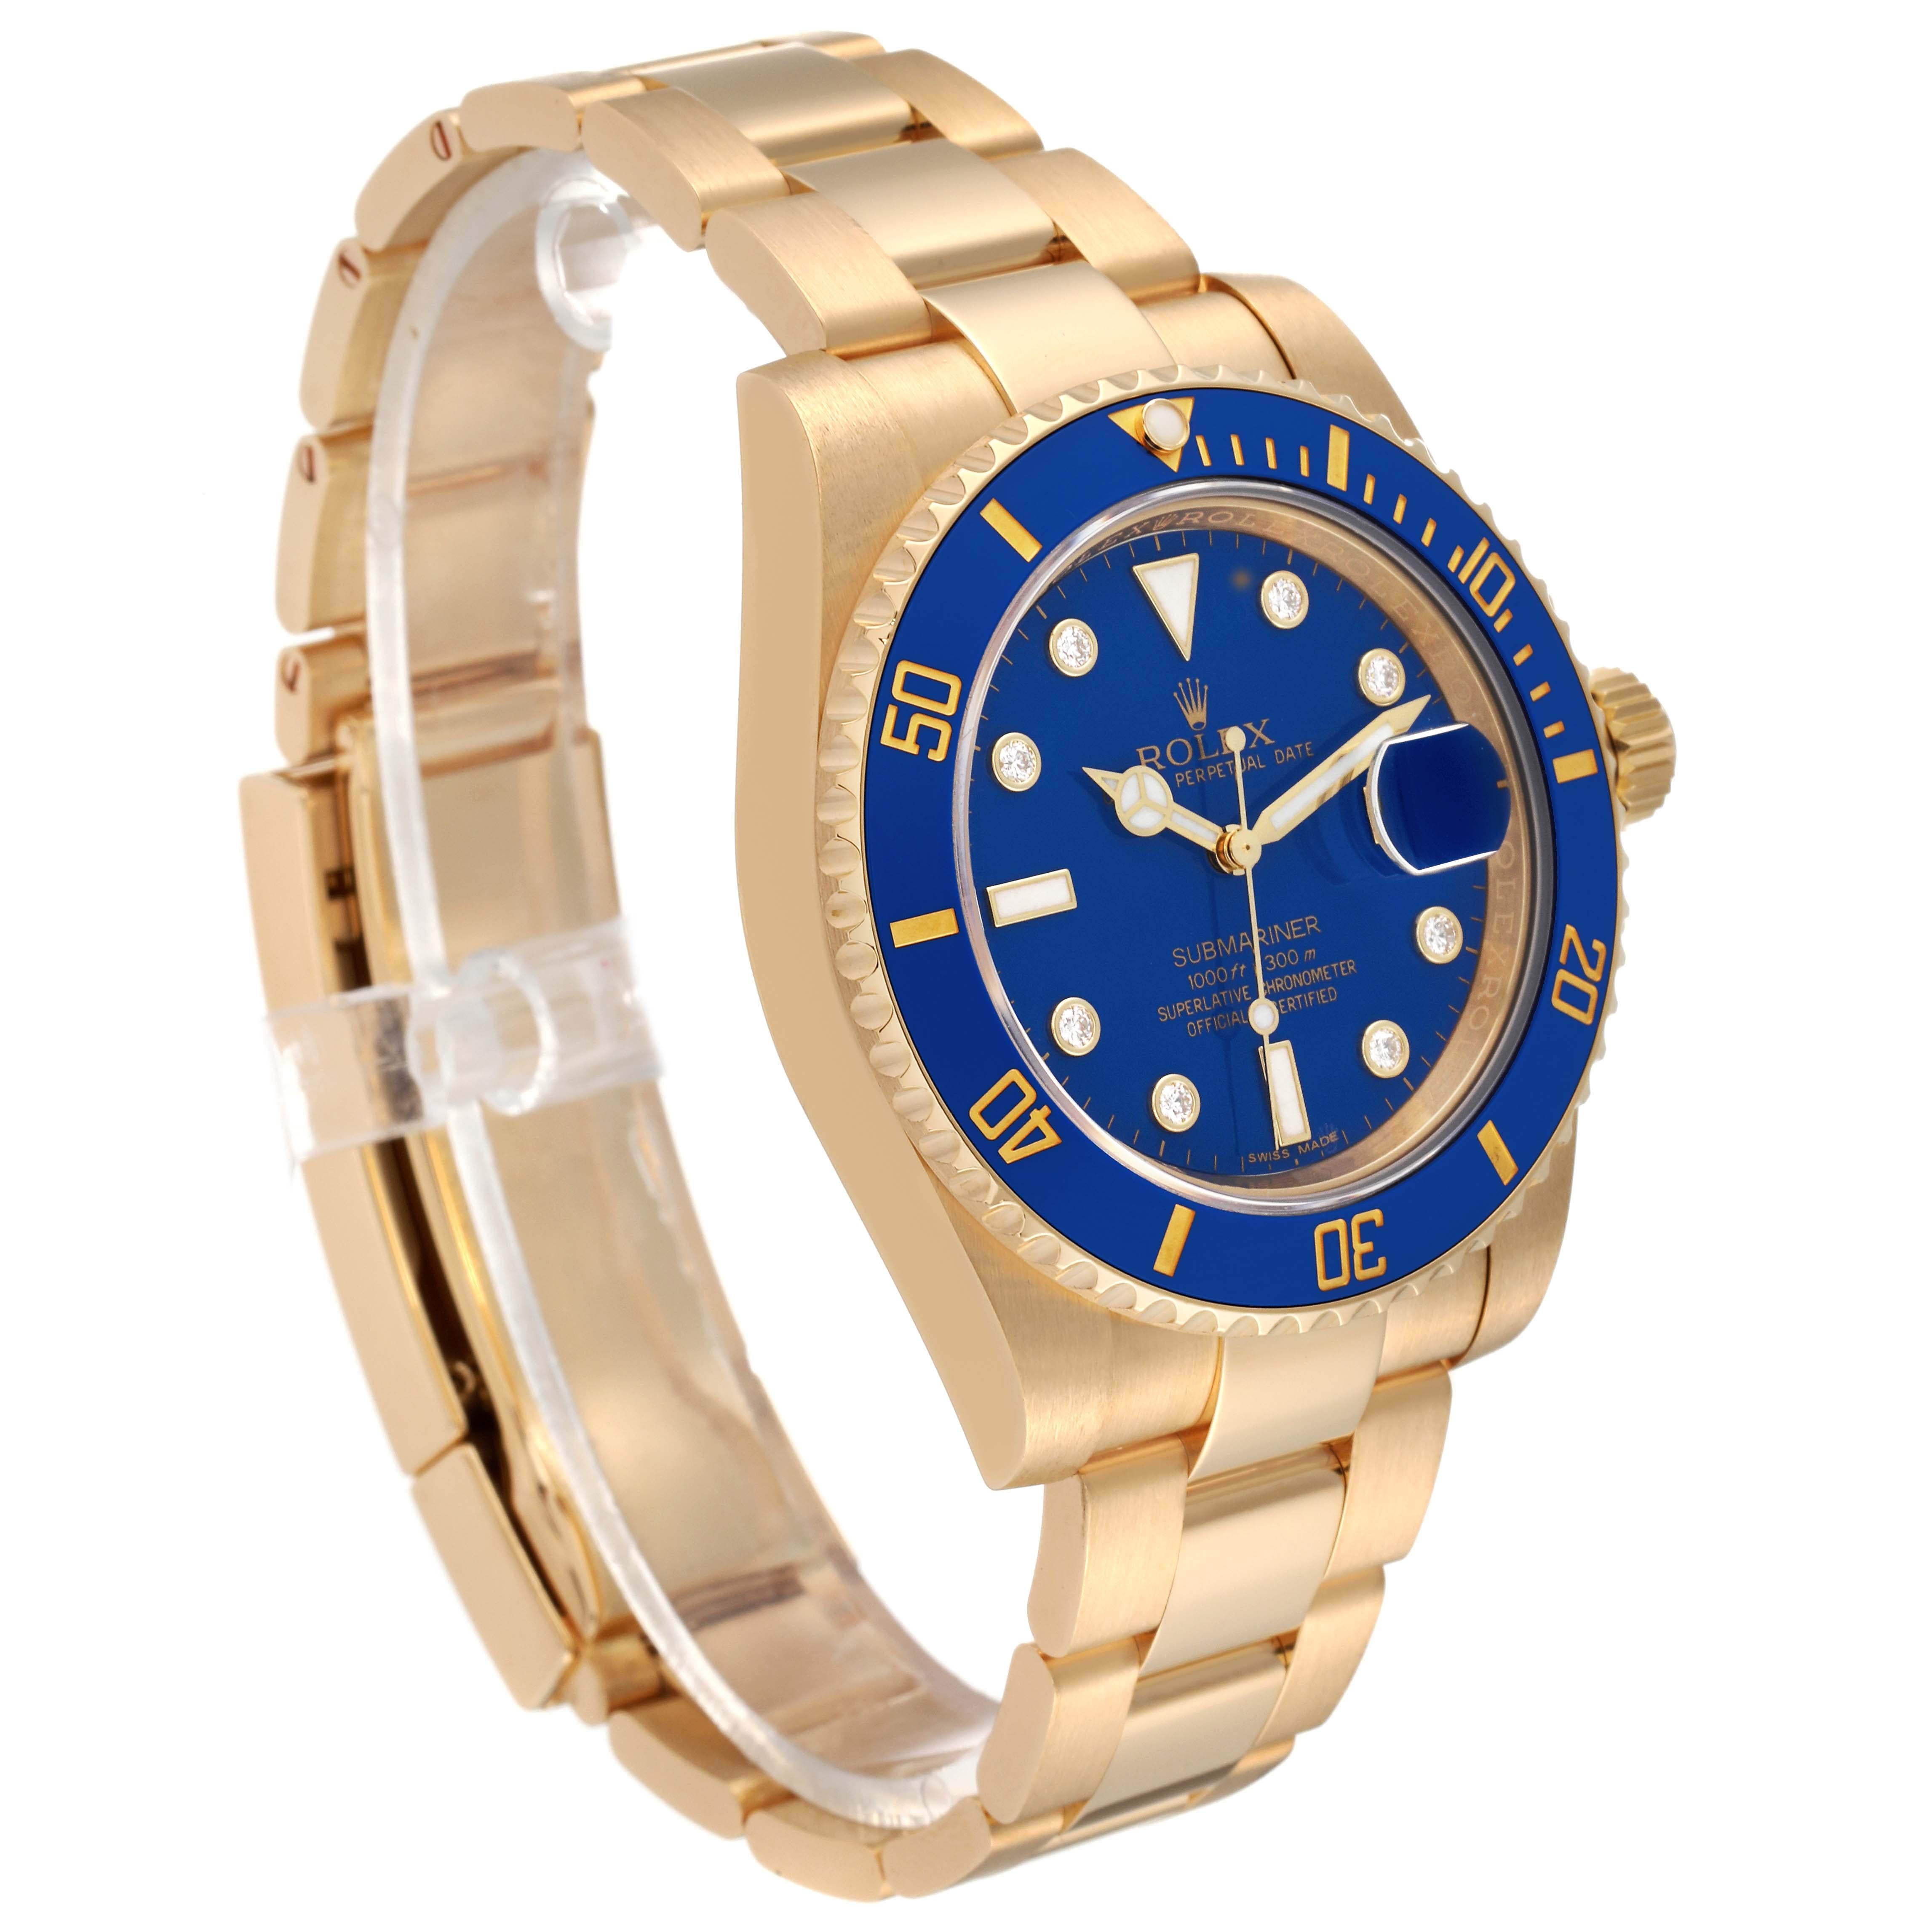 Rolex Submariner Yellow Gold Blue Diamond Dial Mens Watch 116618 Box Card For Sale 4